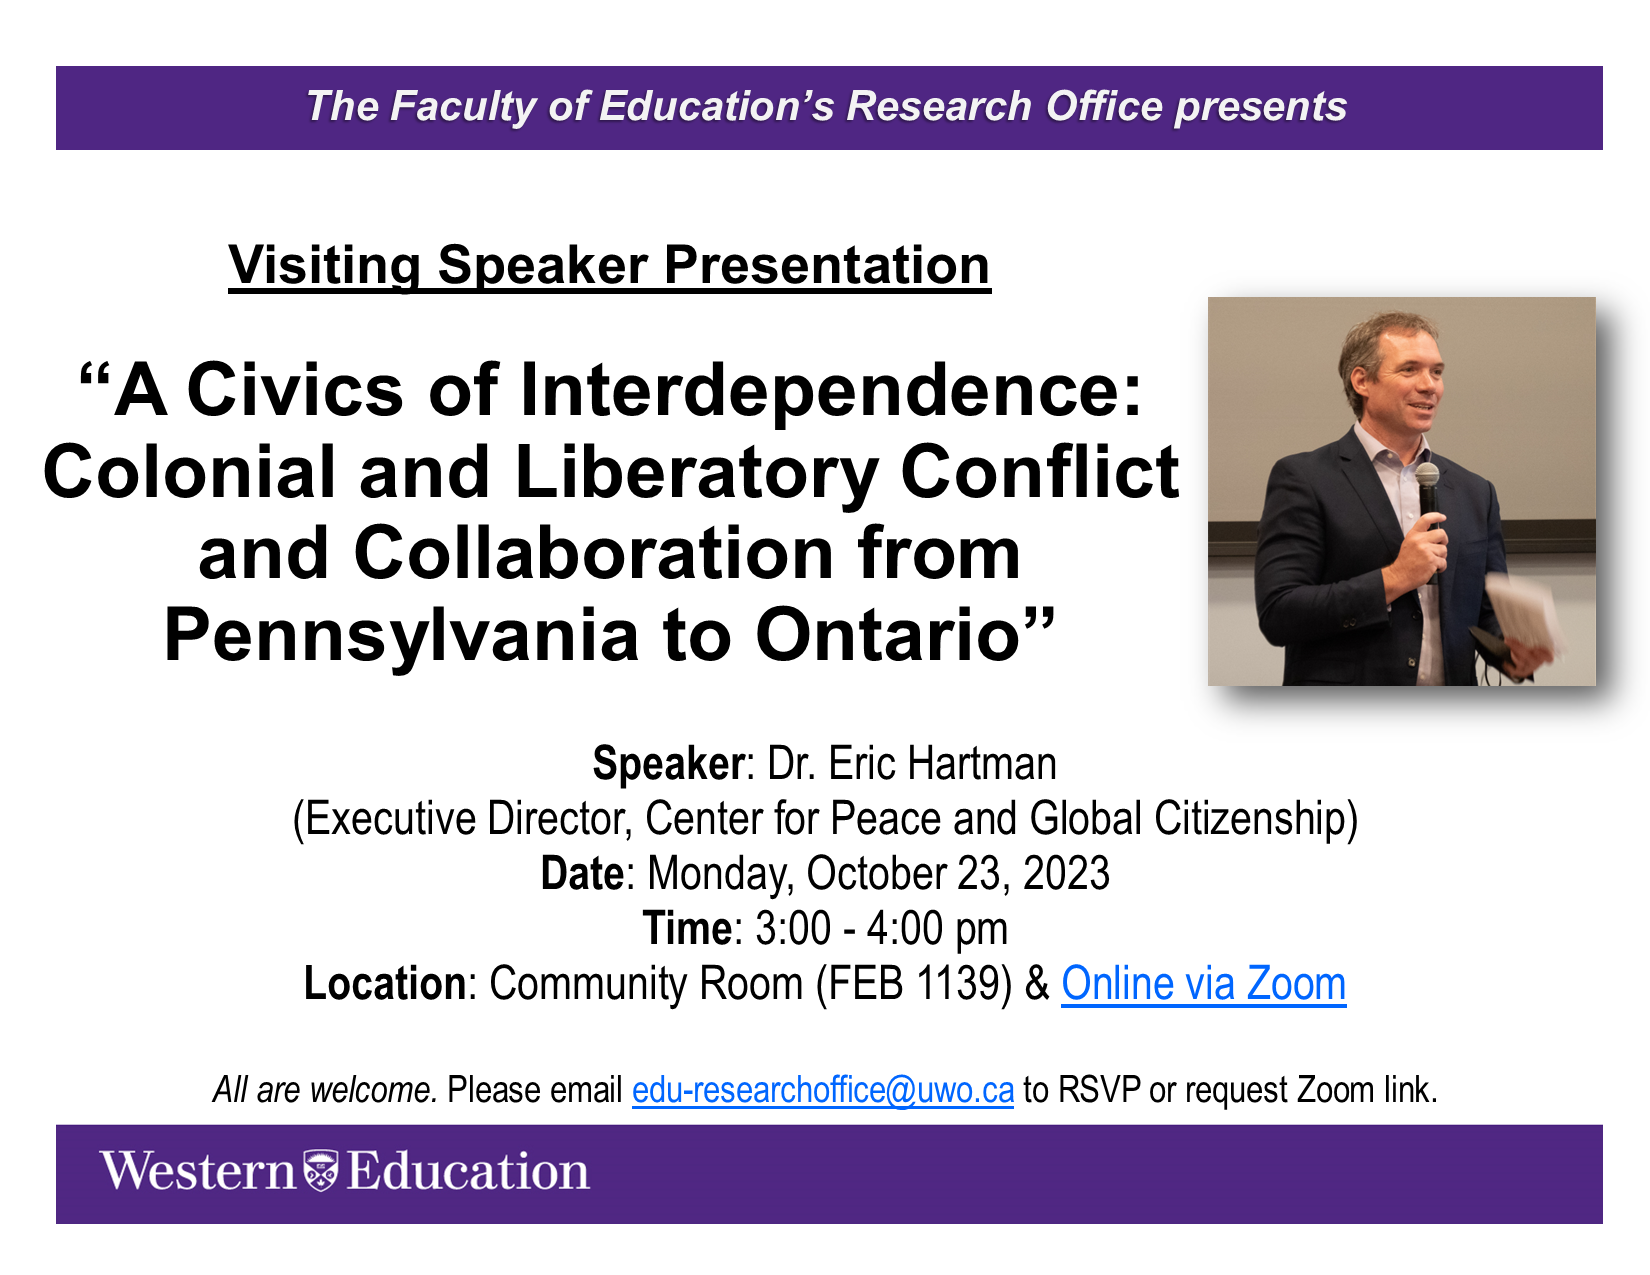 The faculty of education's research office presents: Visiting speaker presentation, a civics of interdependence: colonial and liberatory conflict and collaboration from pennsylvania to ontario